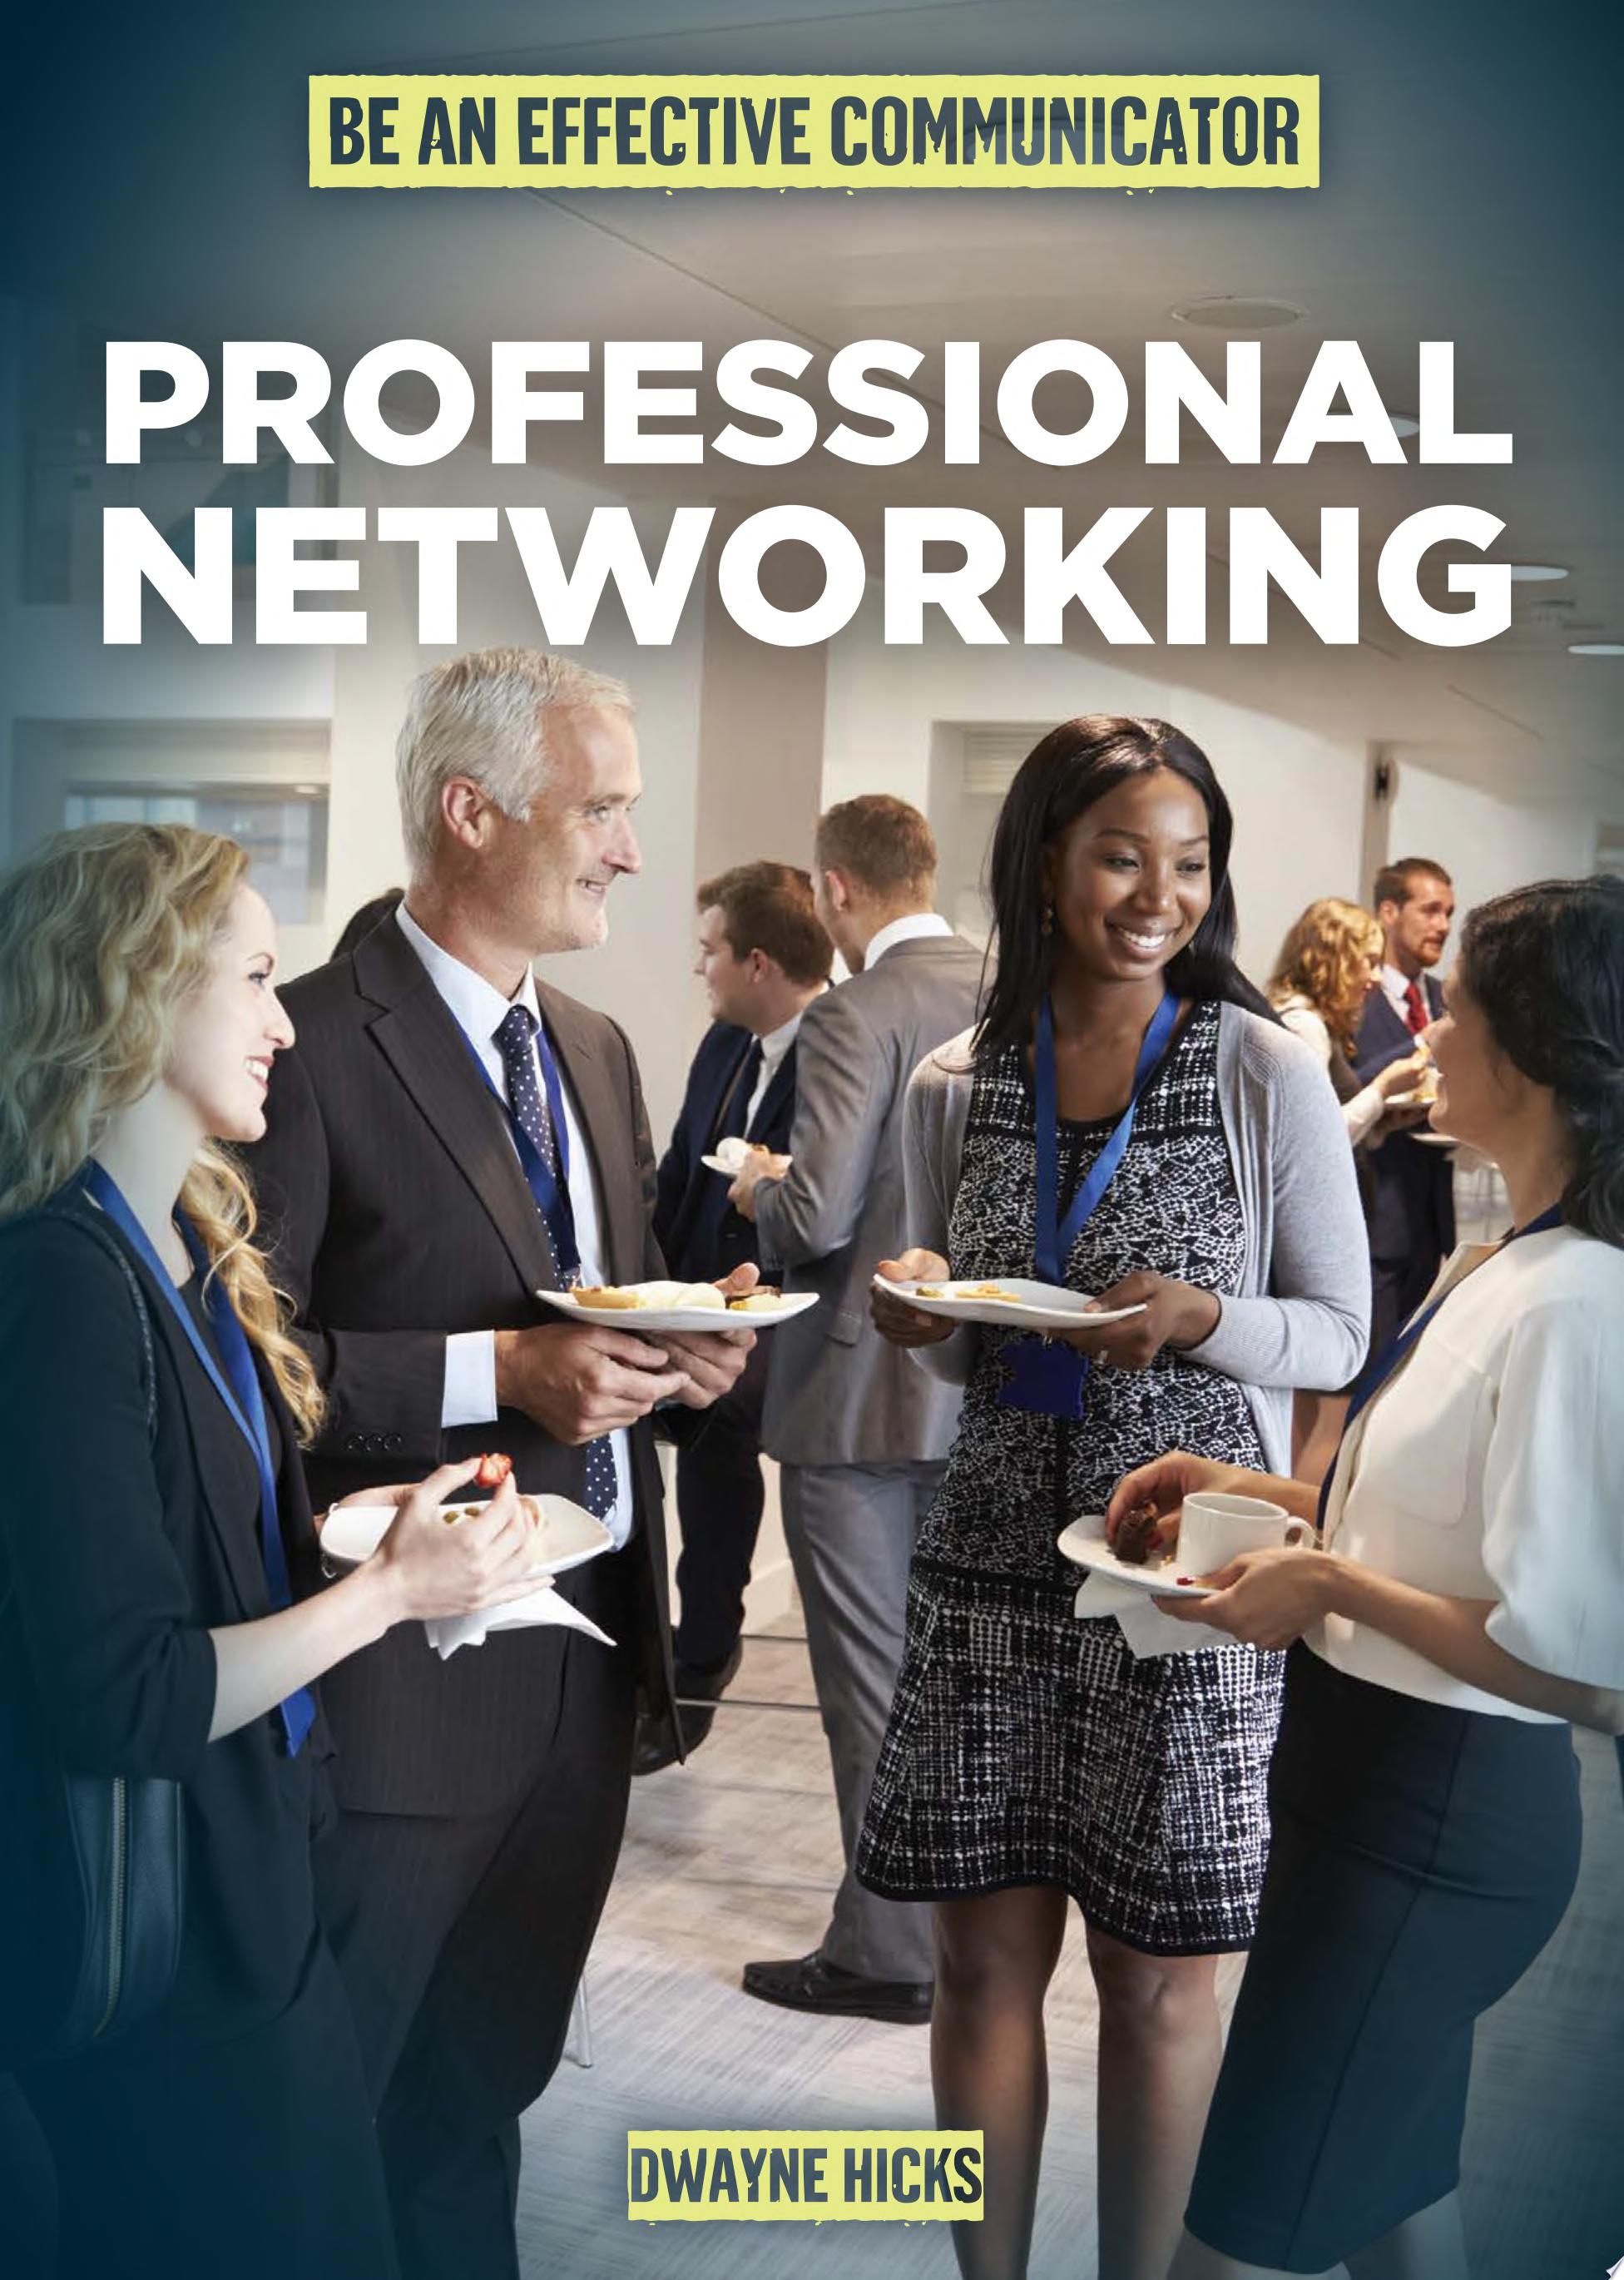 Image for "Professional Networking"